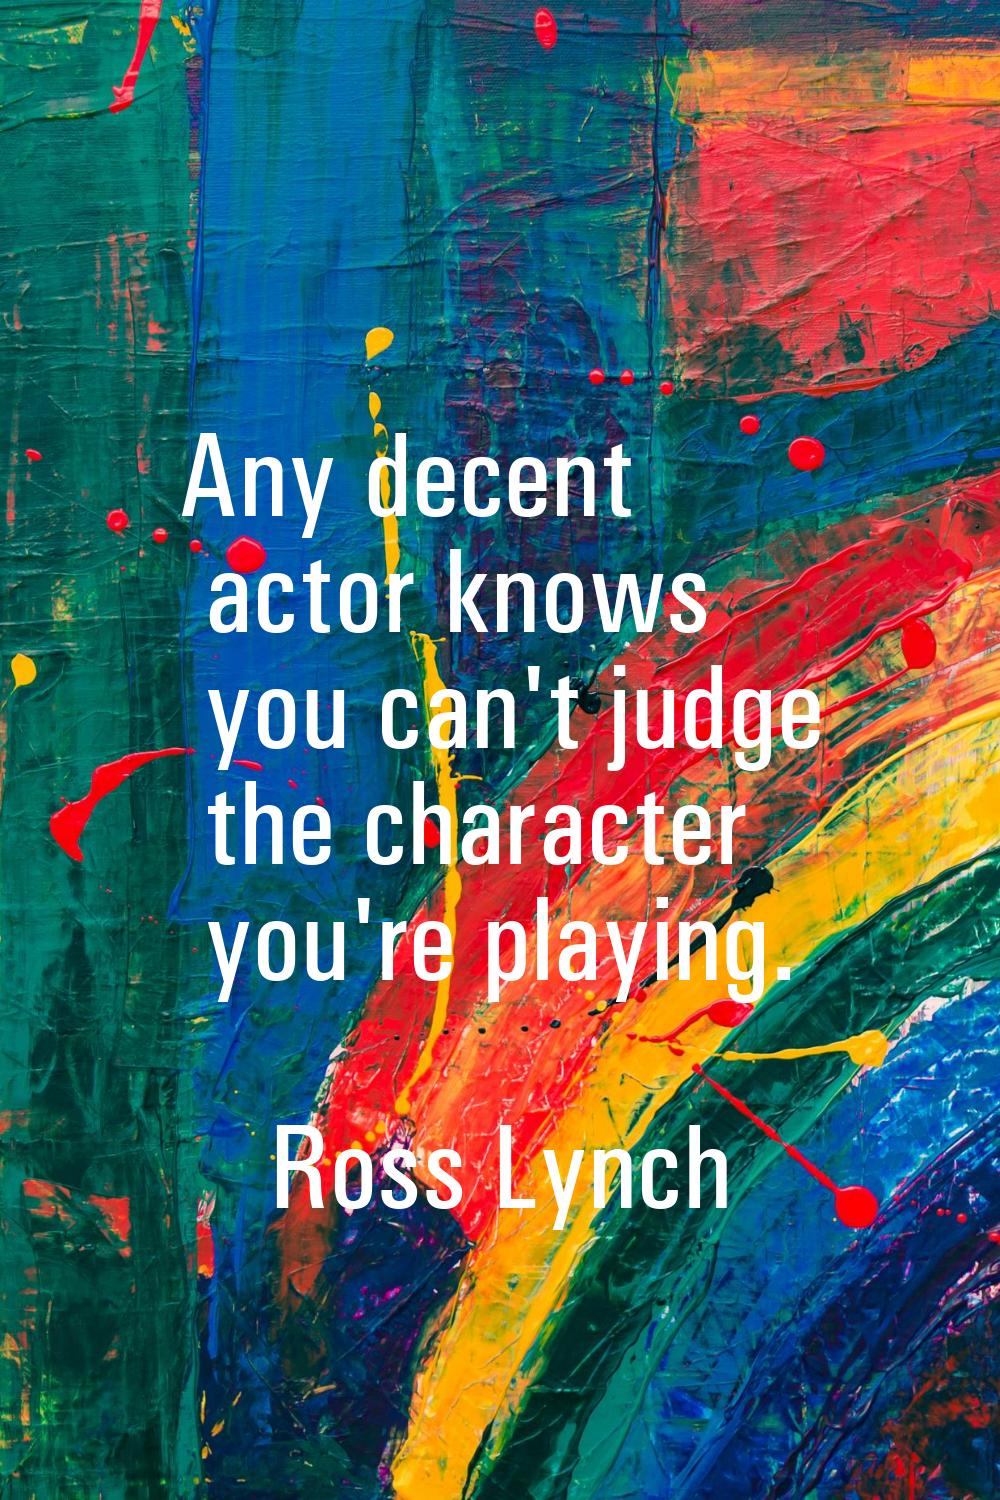 Any decent actor knows you can't judge the character you're playing.